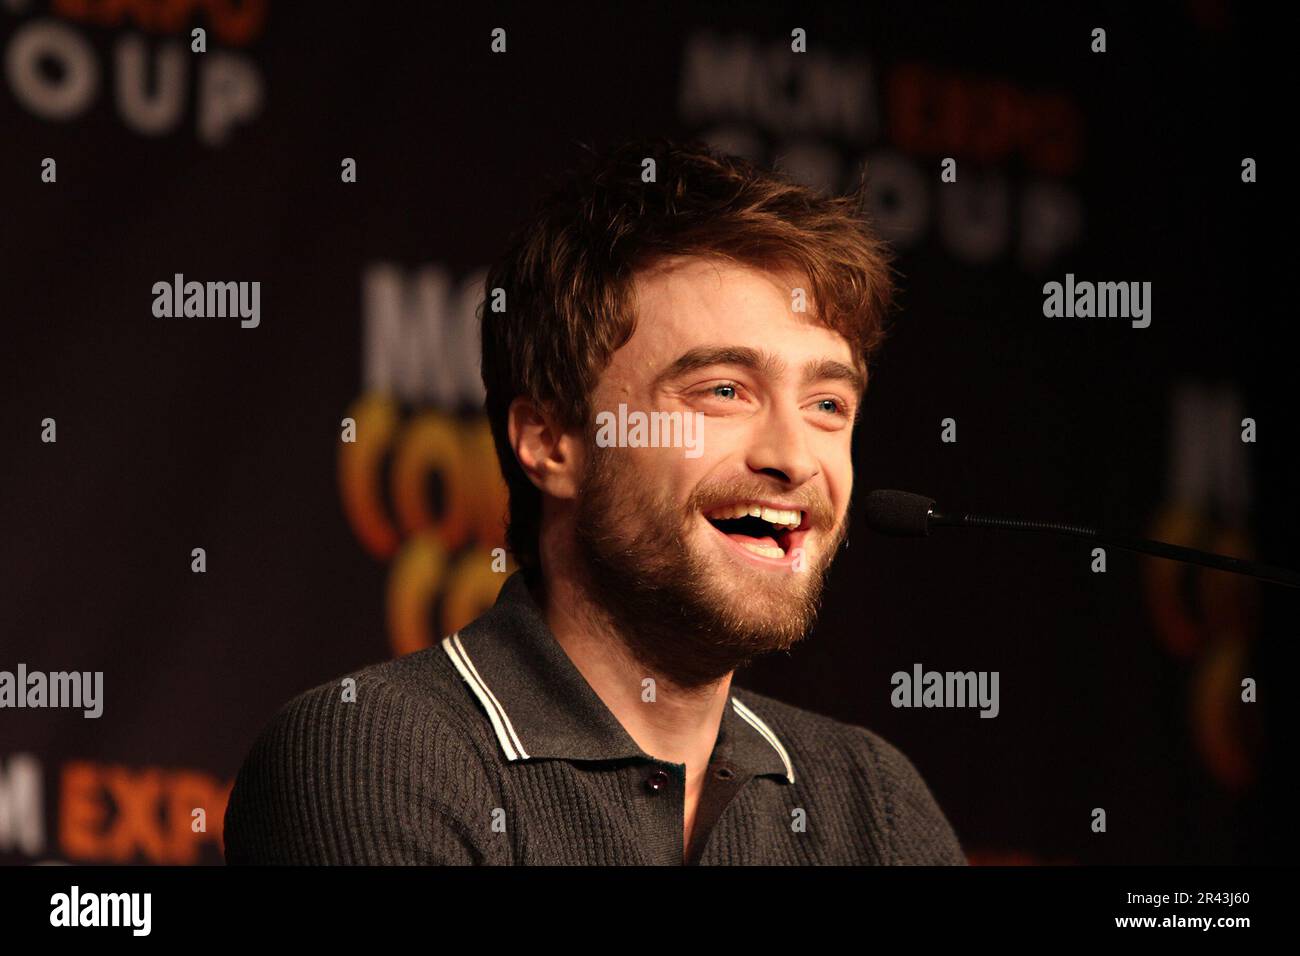 Daniel Radcliffe attending the MCM London Comic Con expo promoting his latest movie, the supernatural film Horns. London  United Kingdom. 24.10.2014 Stock Photo